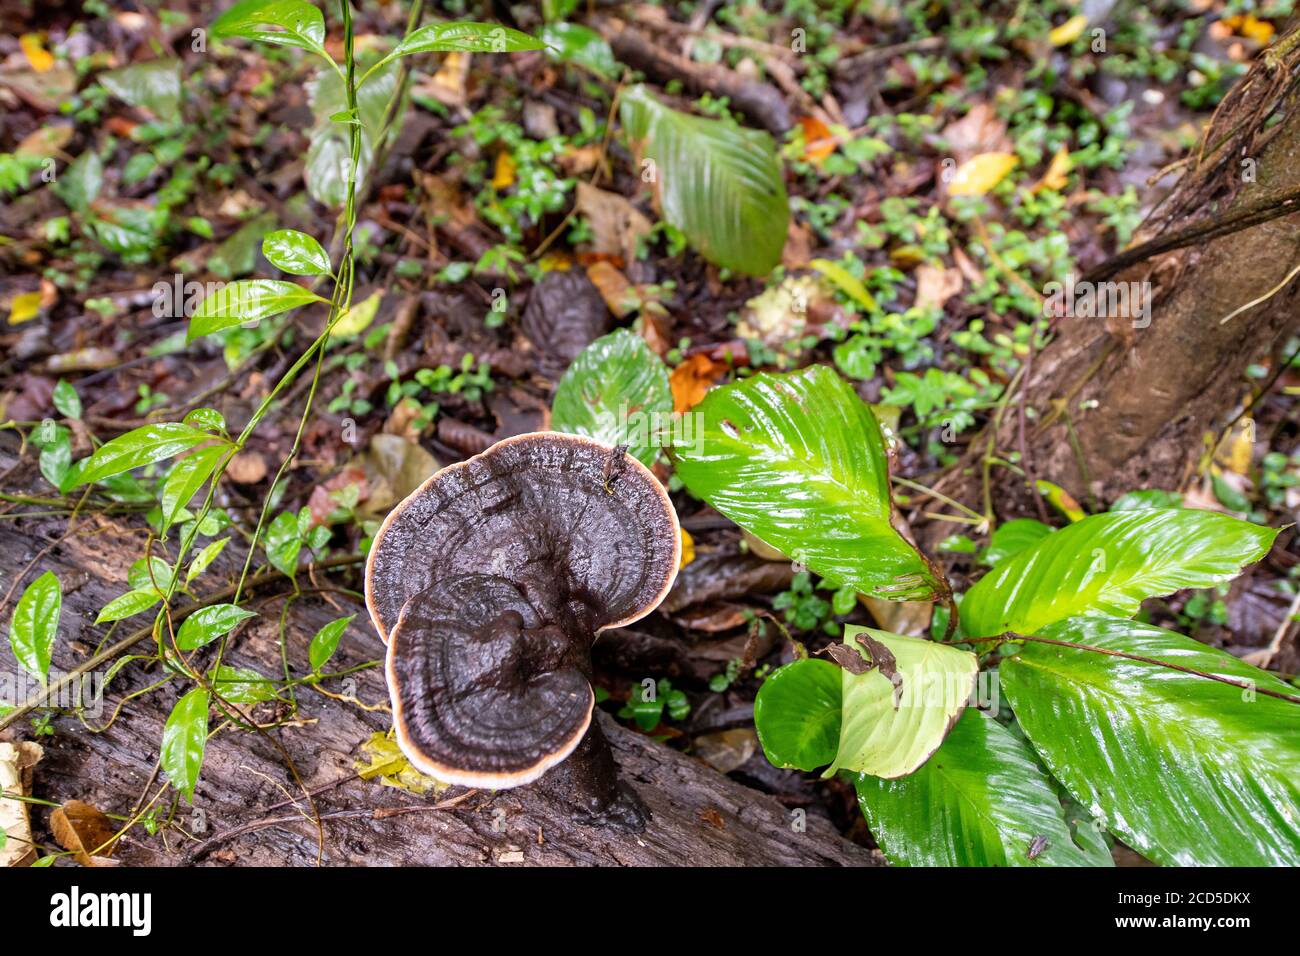 A Mushroom grows in the dampness in the Peruvian Amazon Rainforest Stock Photo